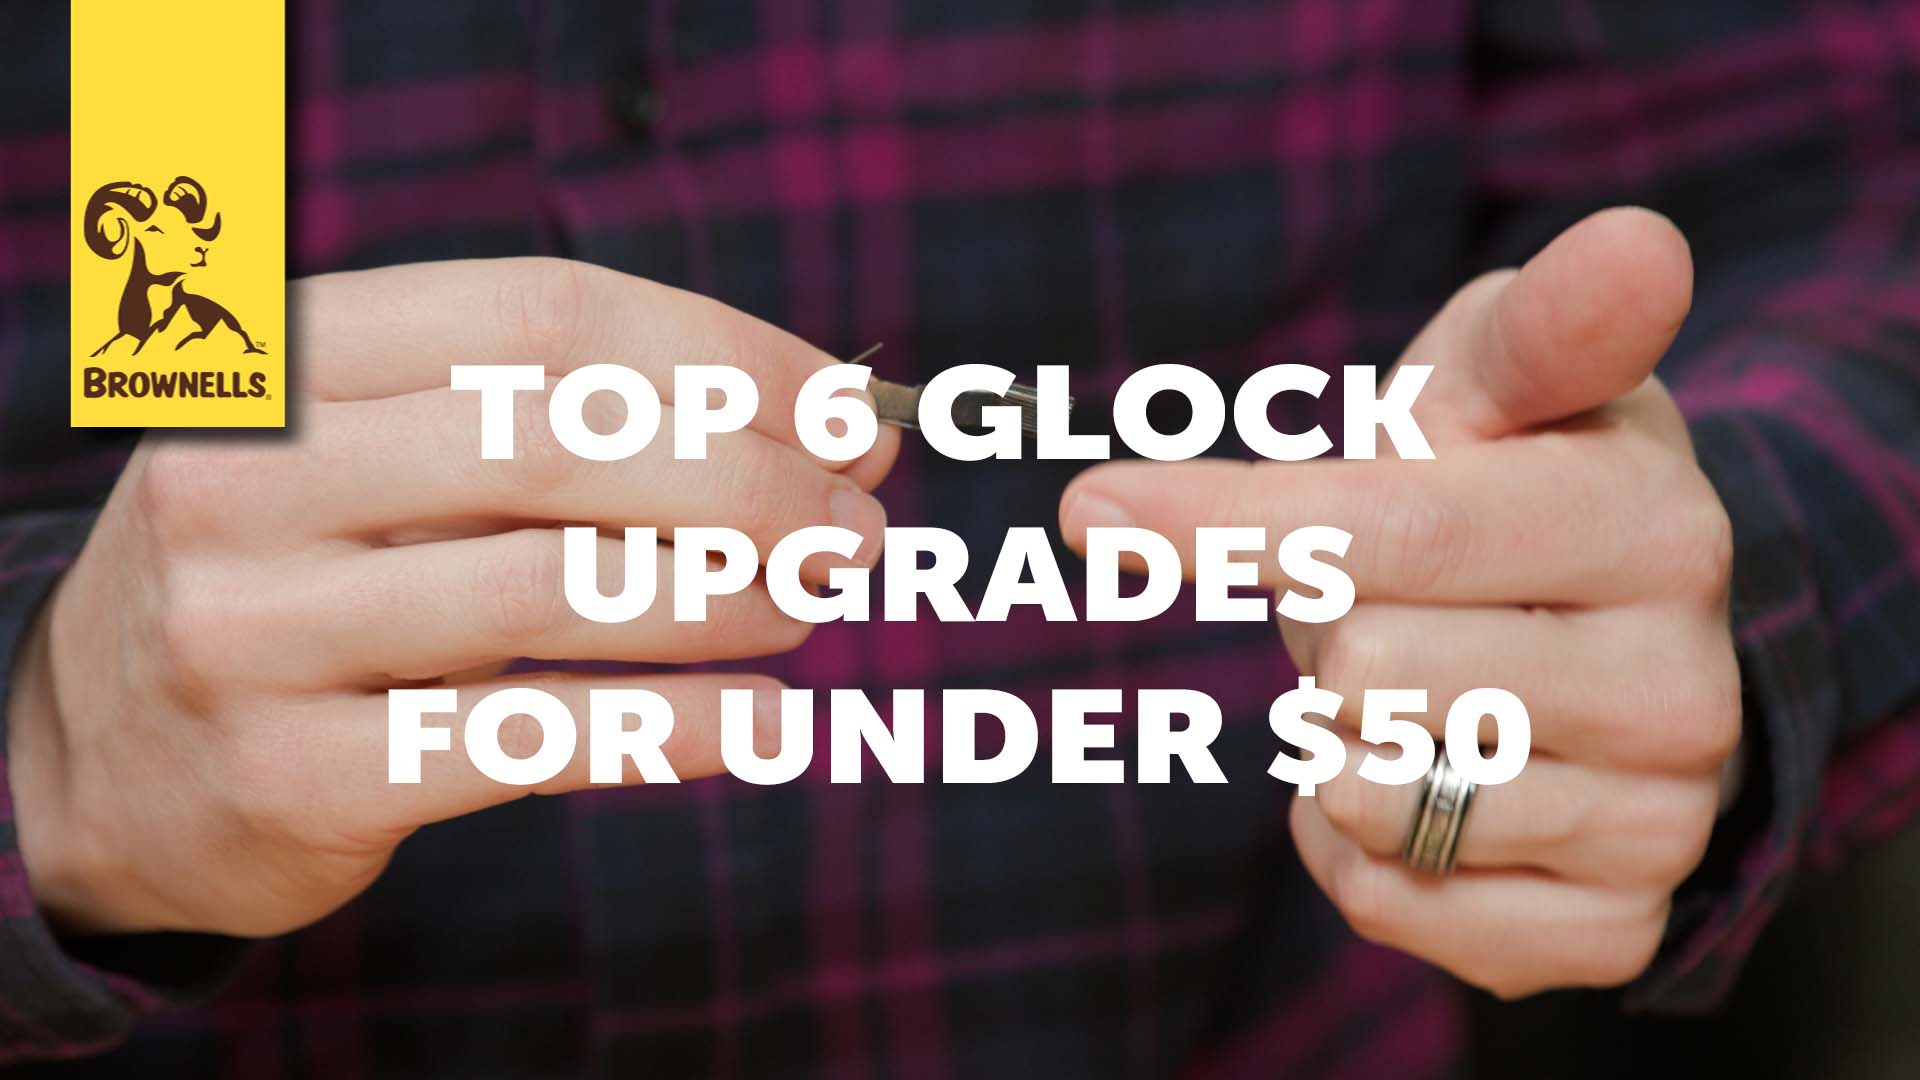 0041-24 Top 6 Glock Upgrades for Under $50_Thumb